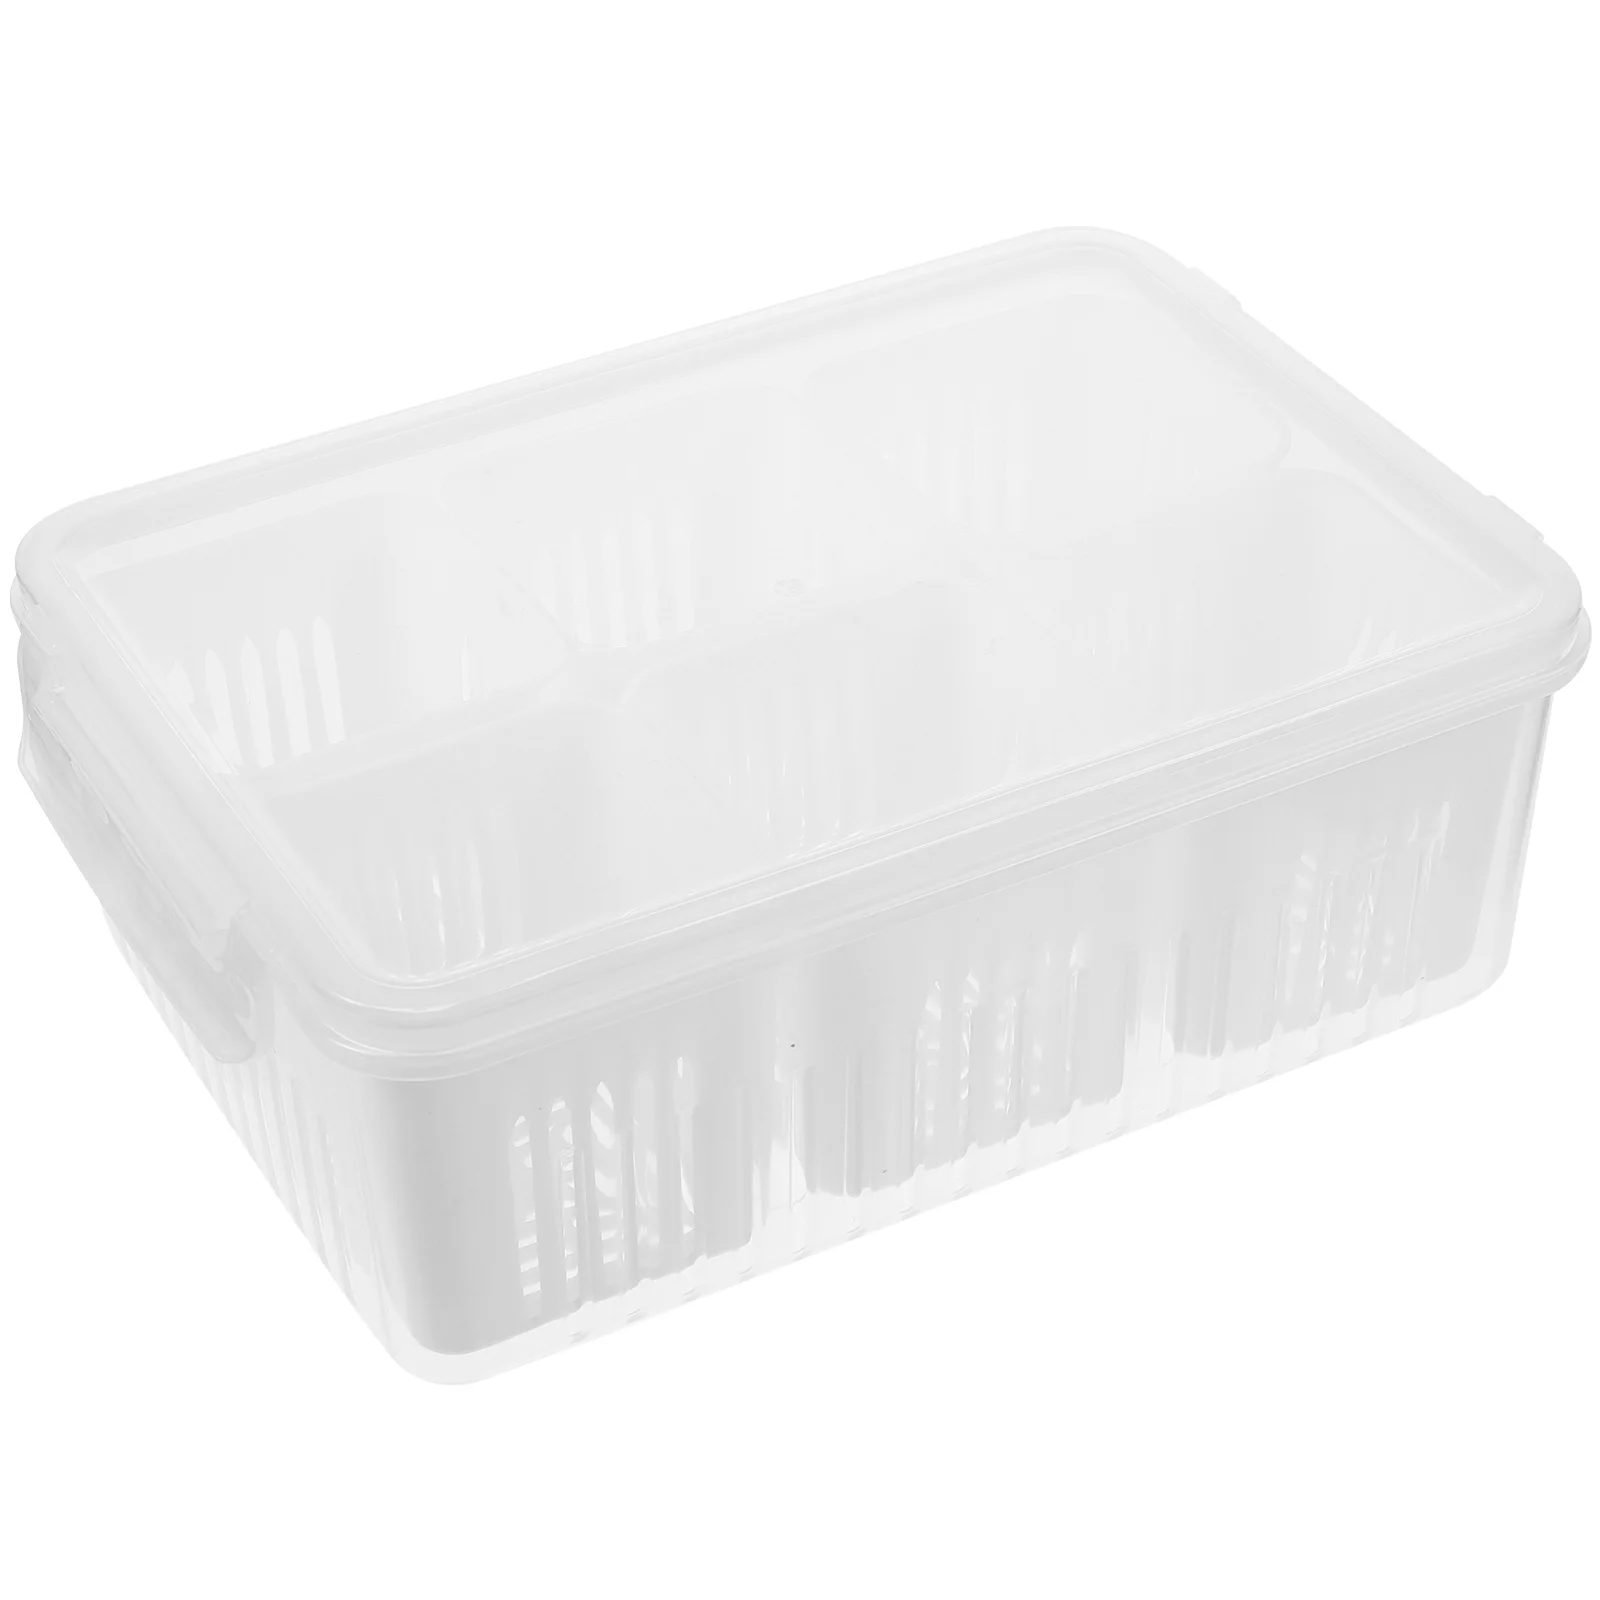 

Freezer Clear Produce Containers For Fridge Onion Keeper Meal Prep Containers Reusable for Freezer Kitchen Fridge Refrigerator